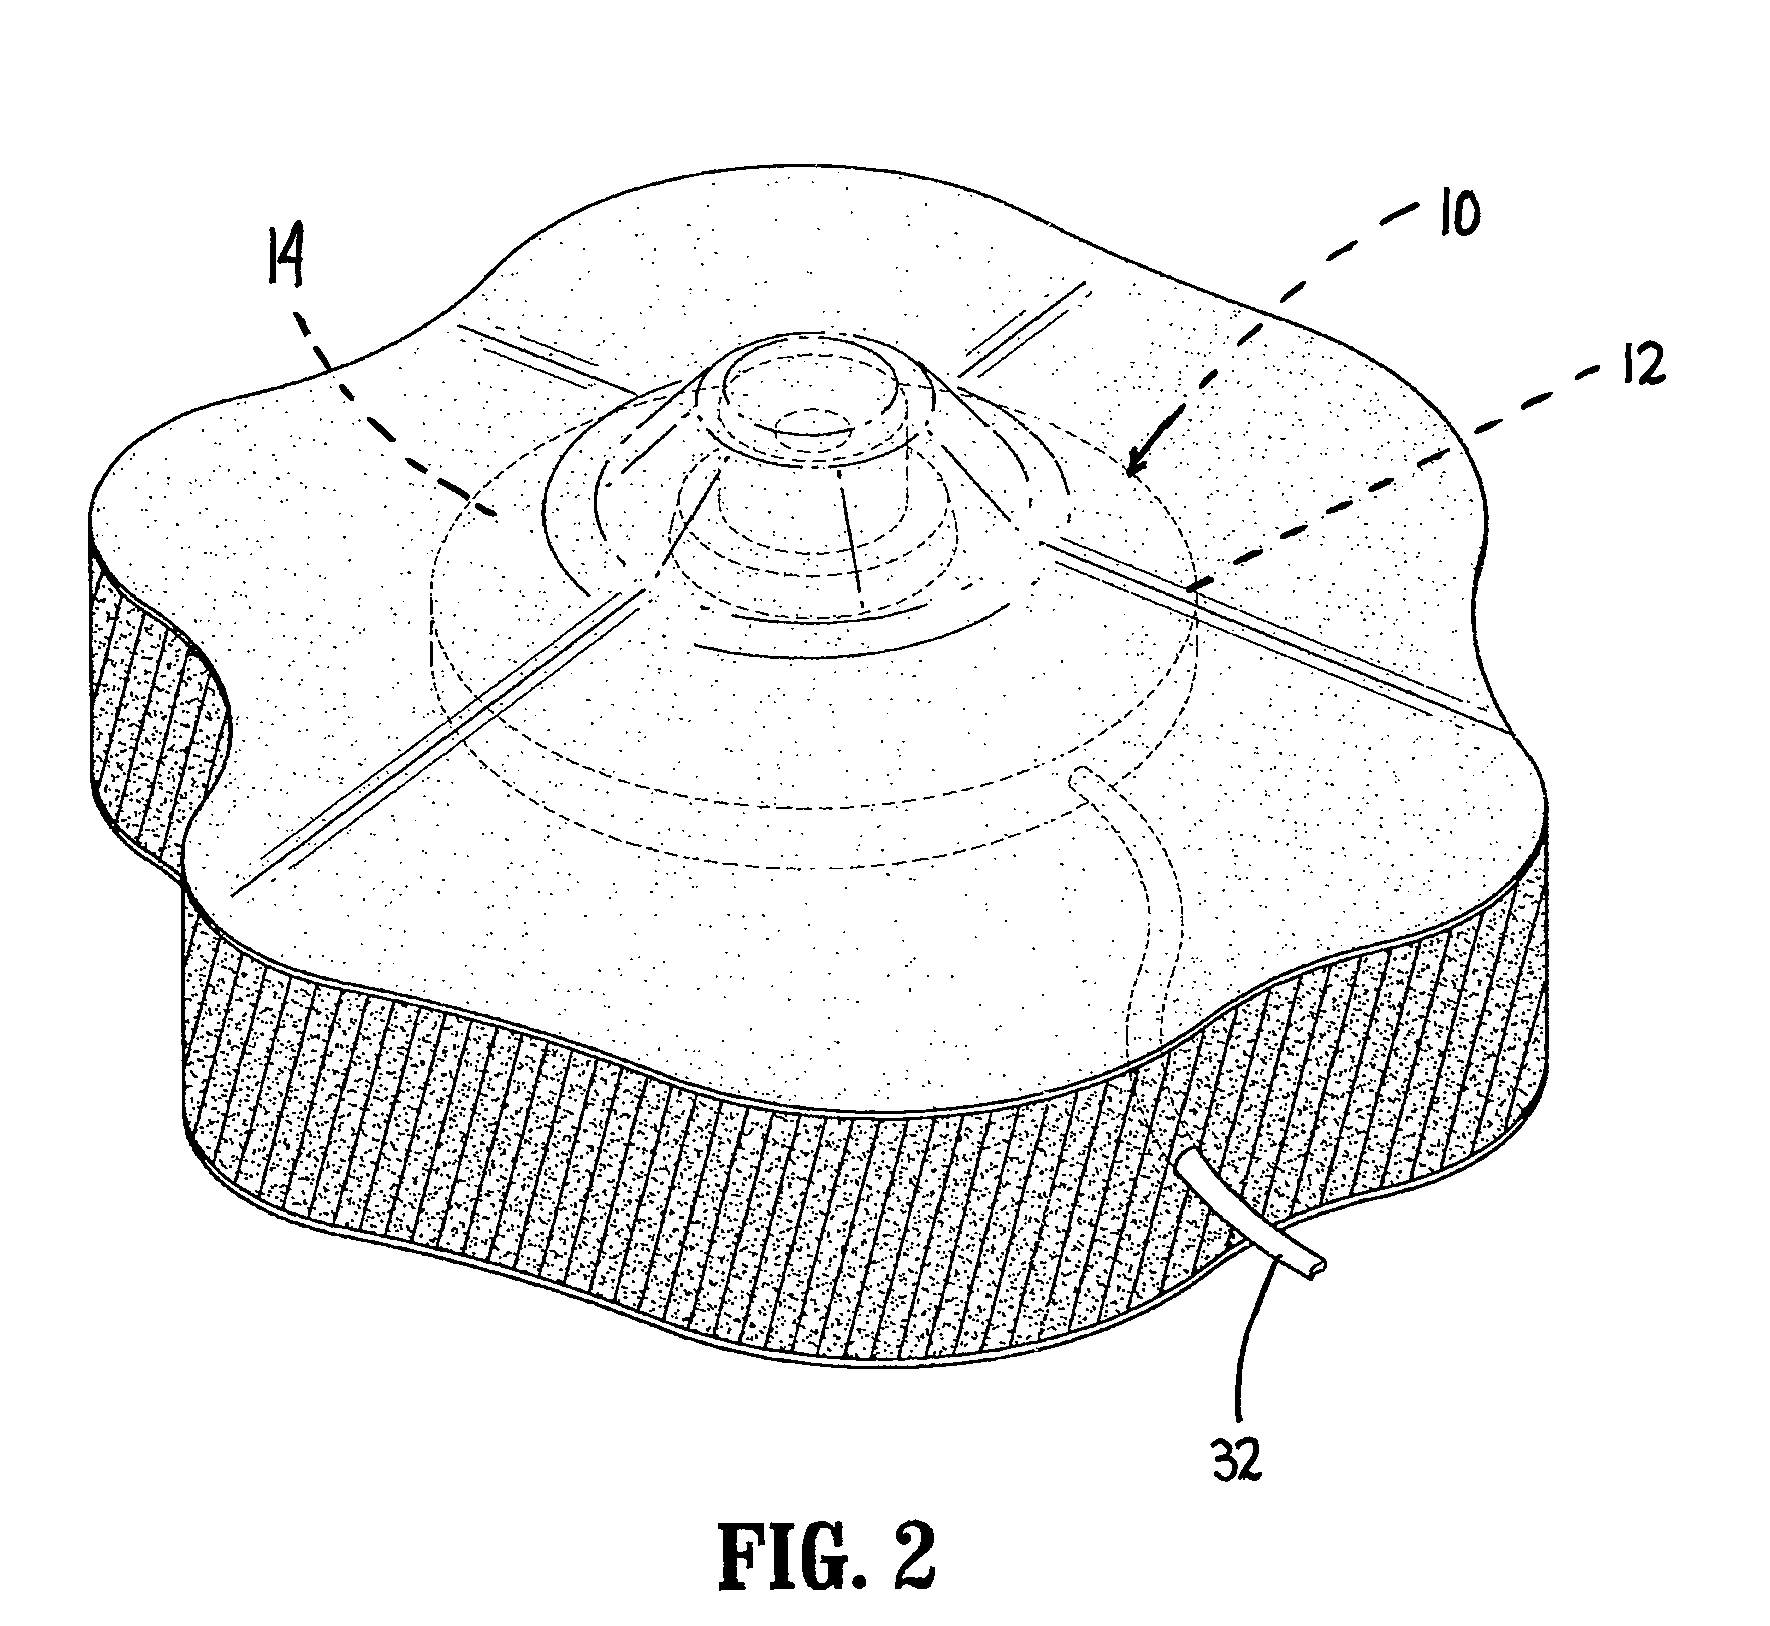 Two position septum for implantable vascular access device